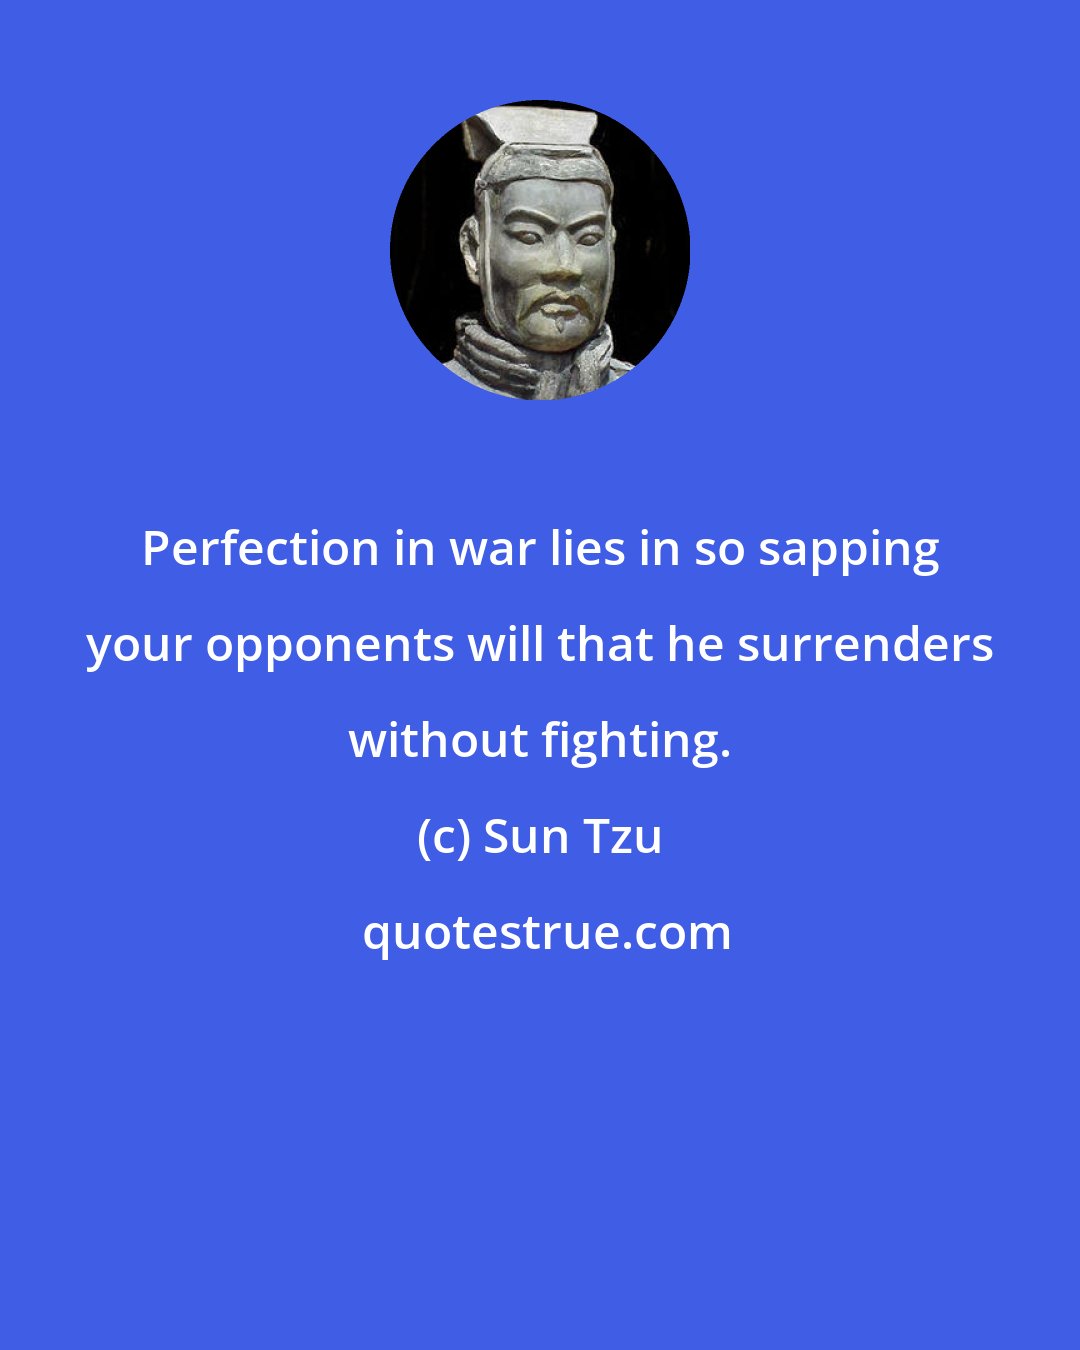 Sun Tzu: Perfection in war lies in so sapping your opponents will that he surrenders without fighting.